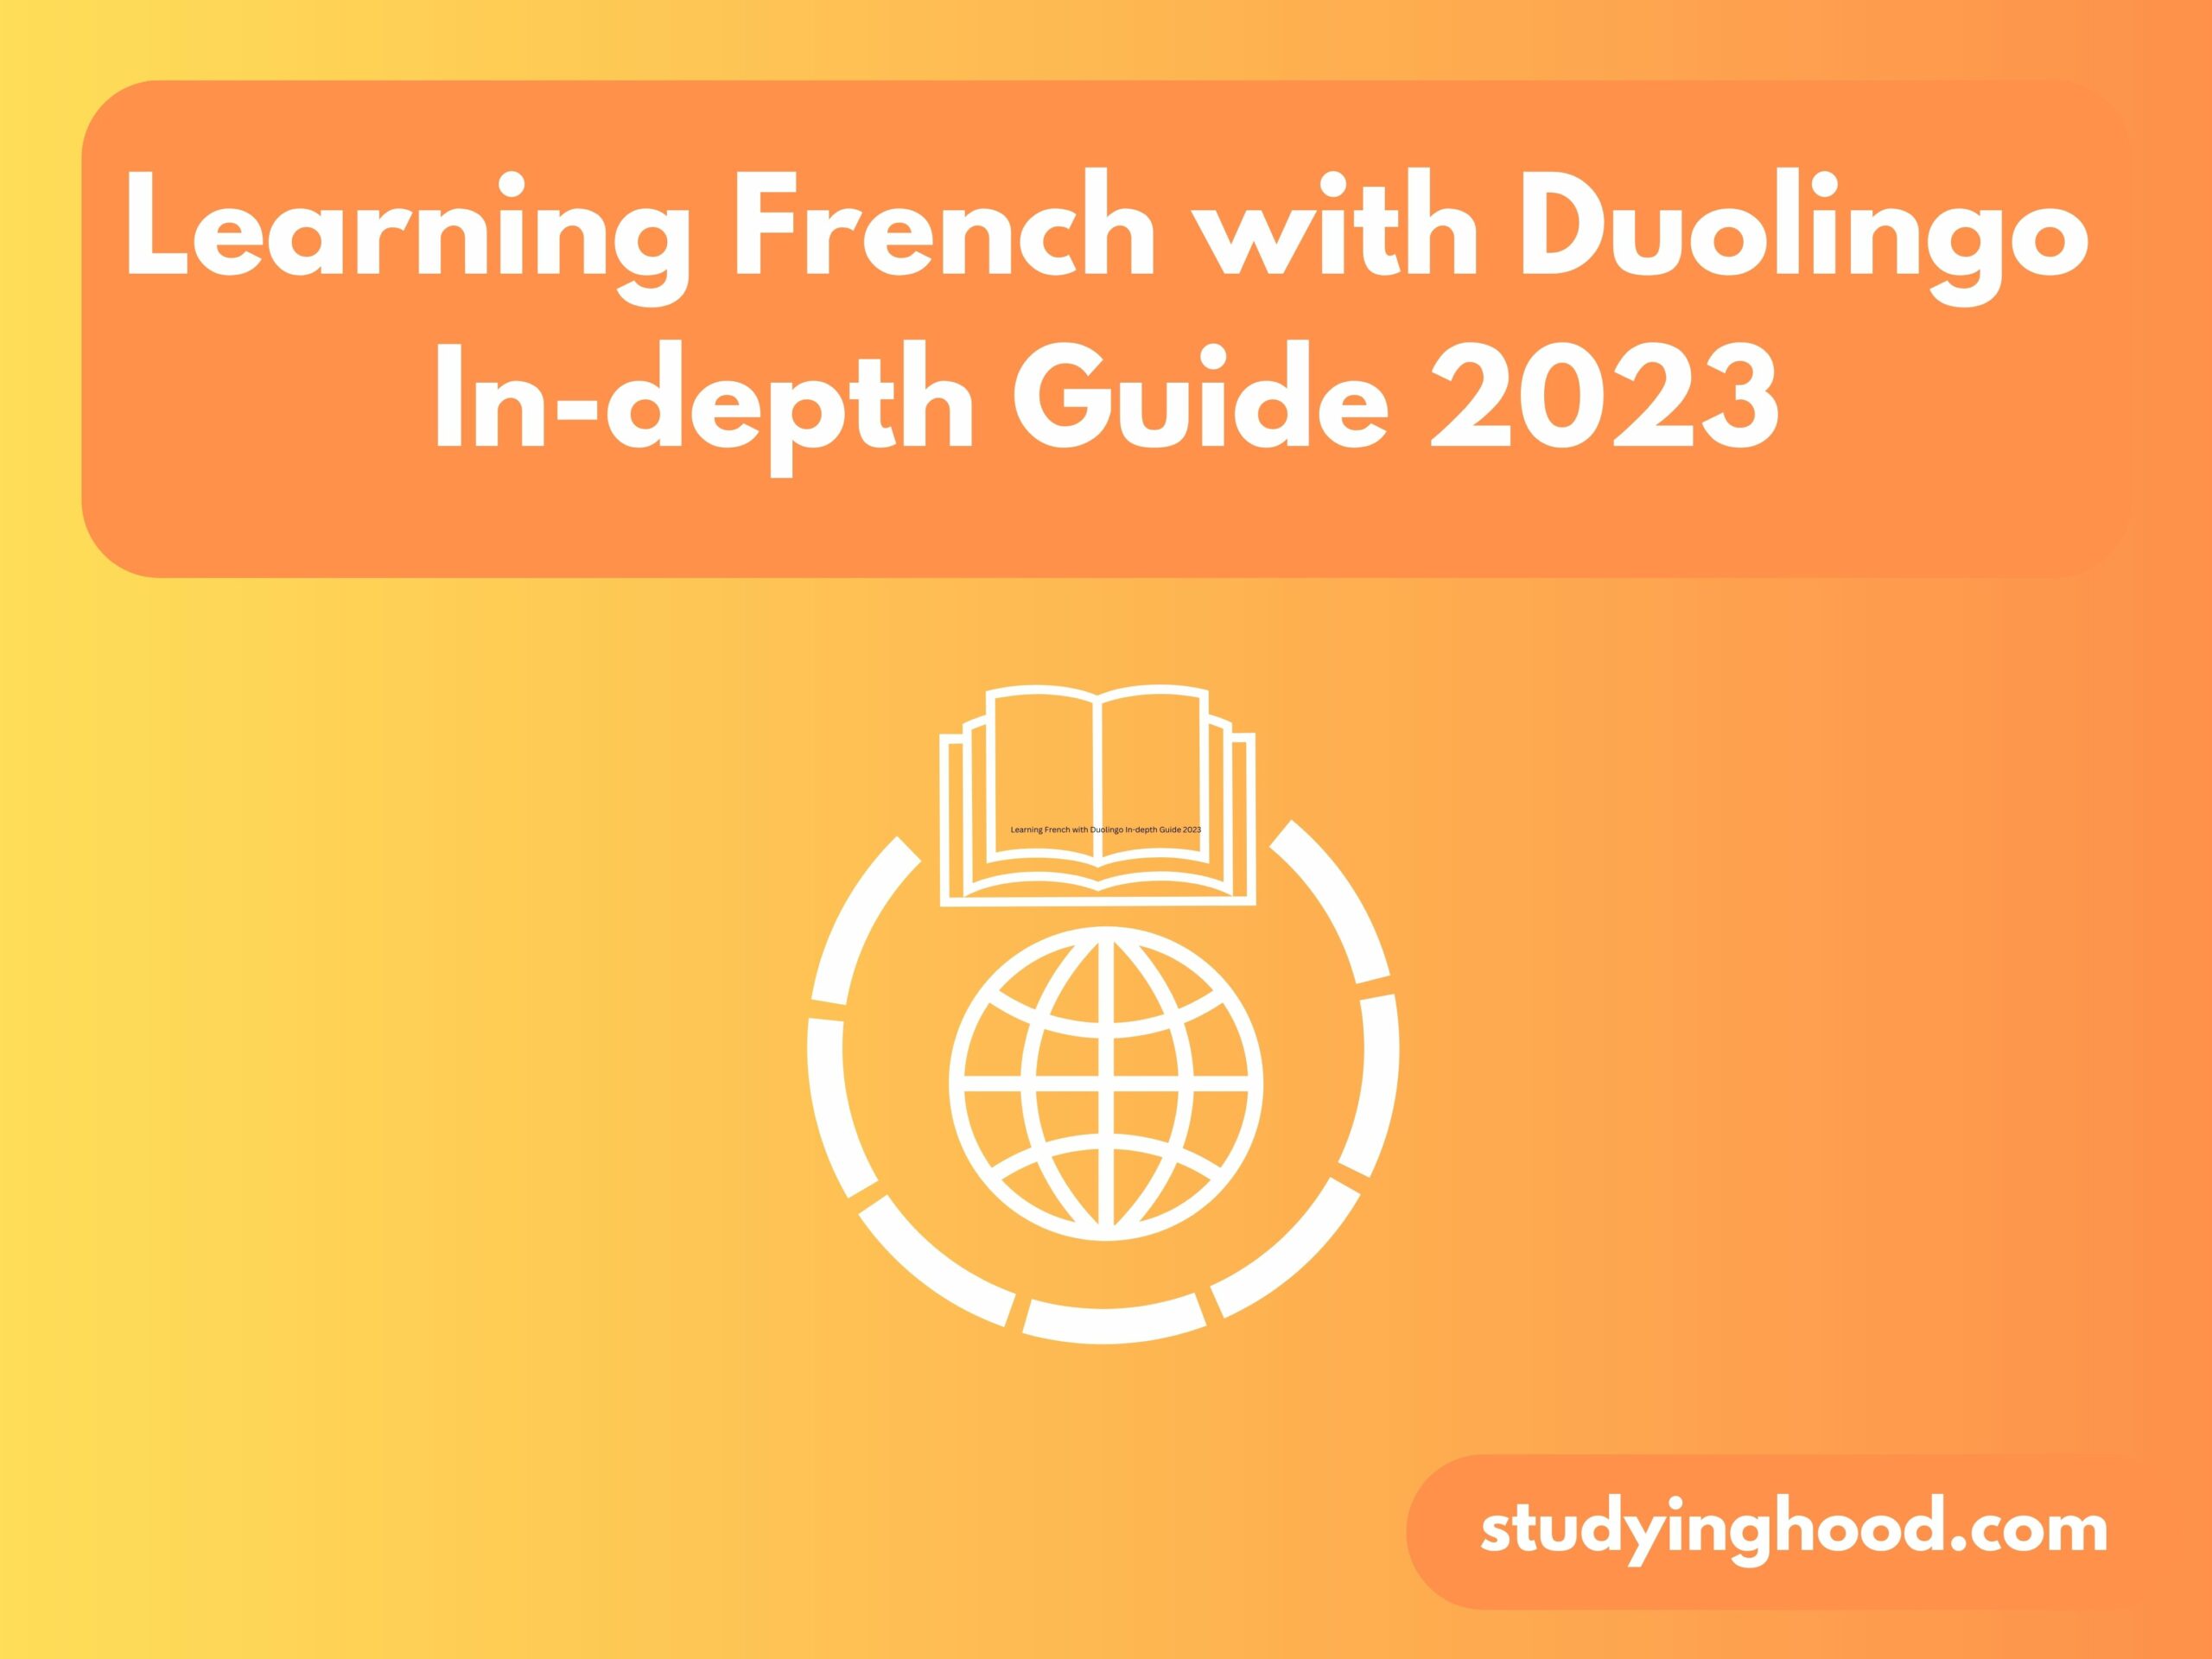 Learning French with Duolingo In-depth Guide 2023